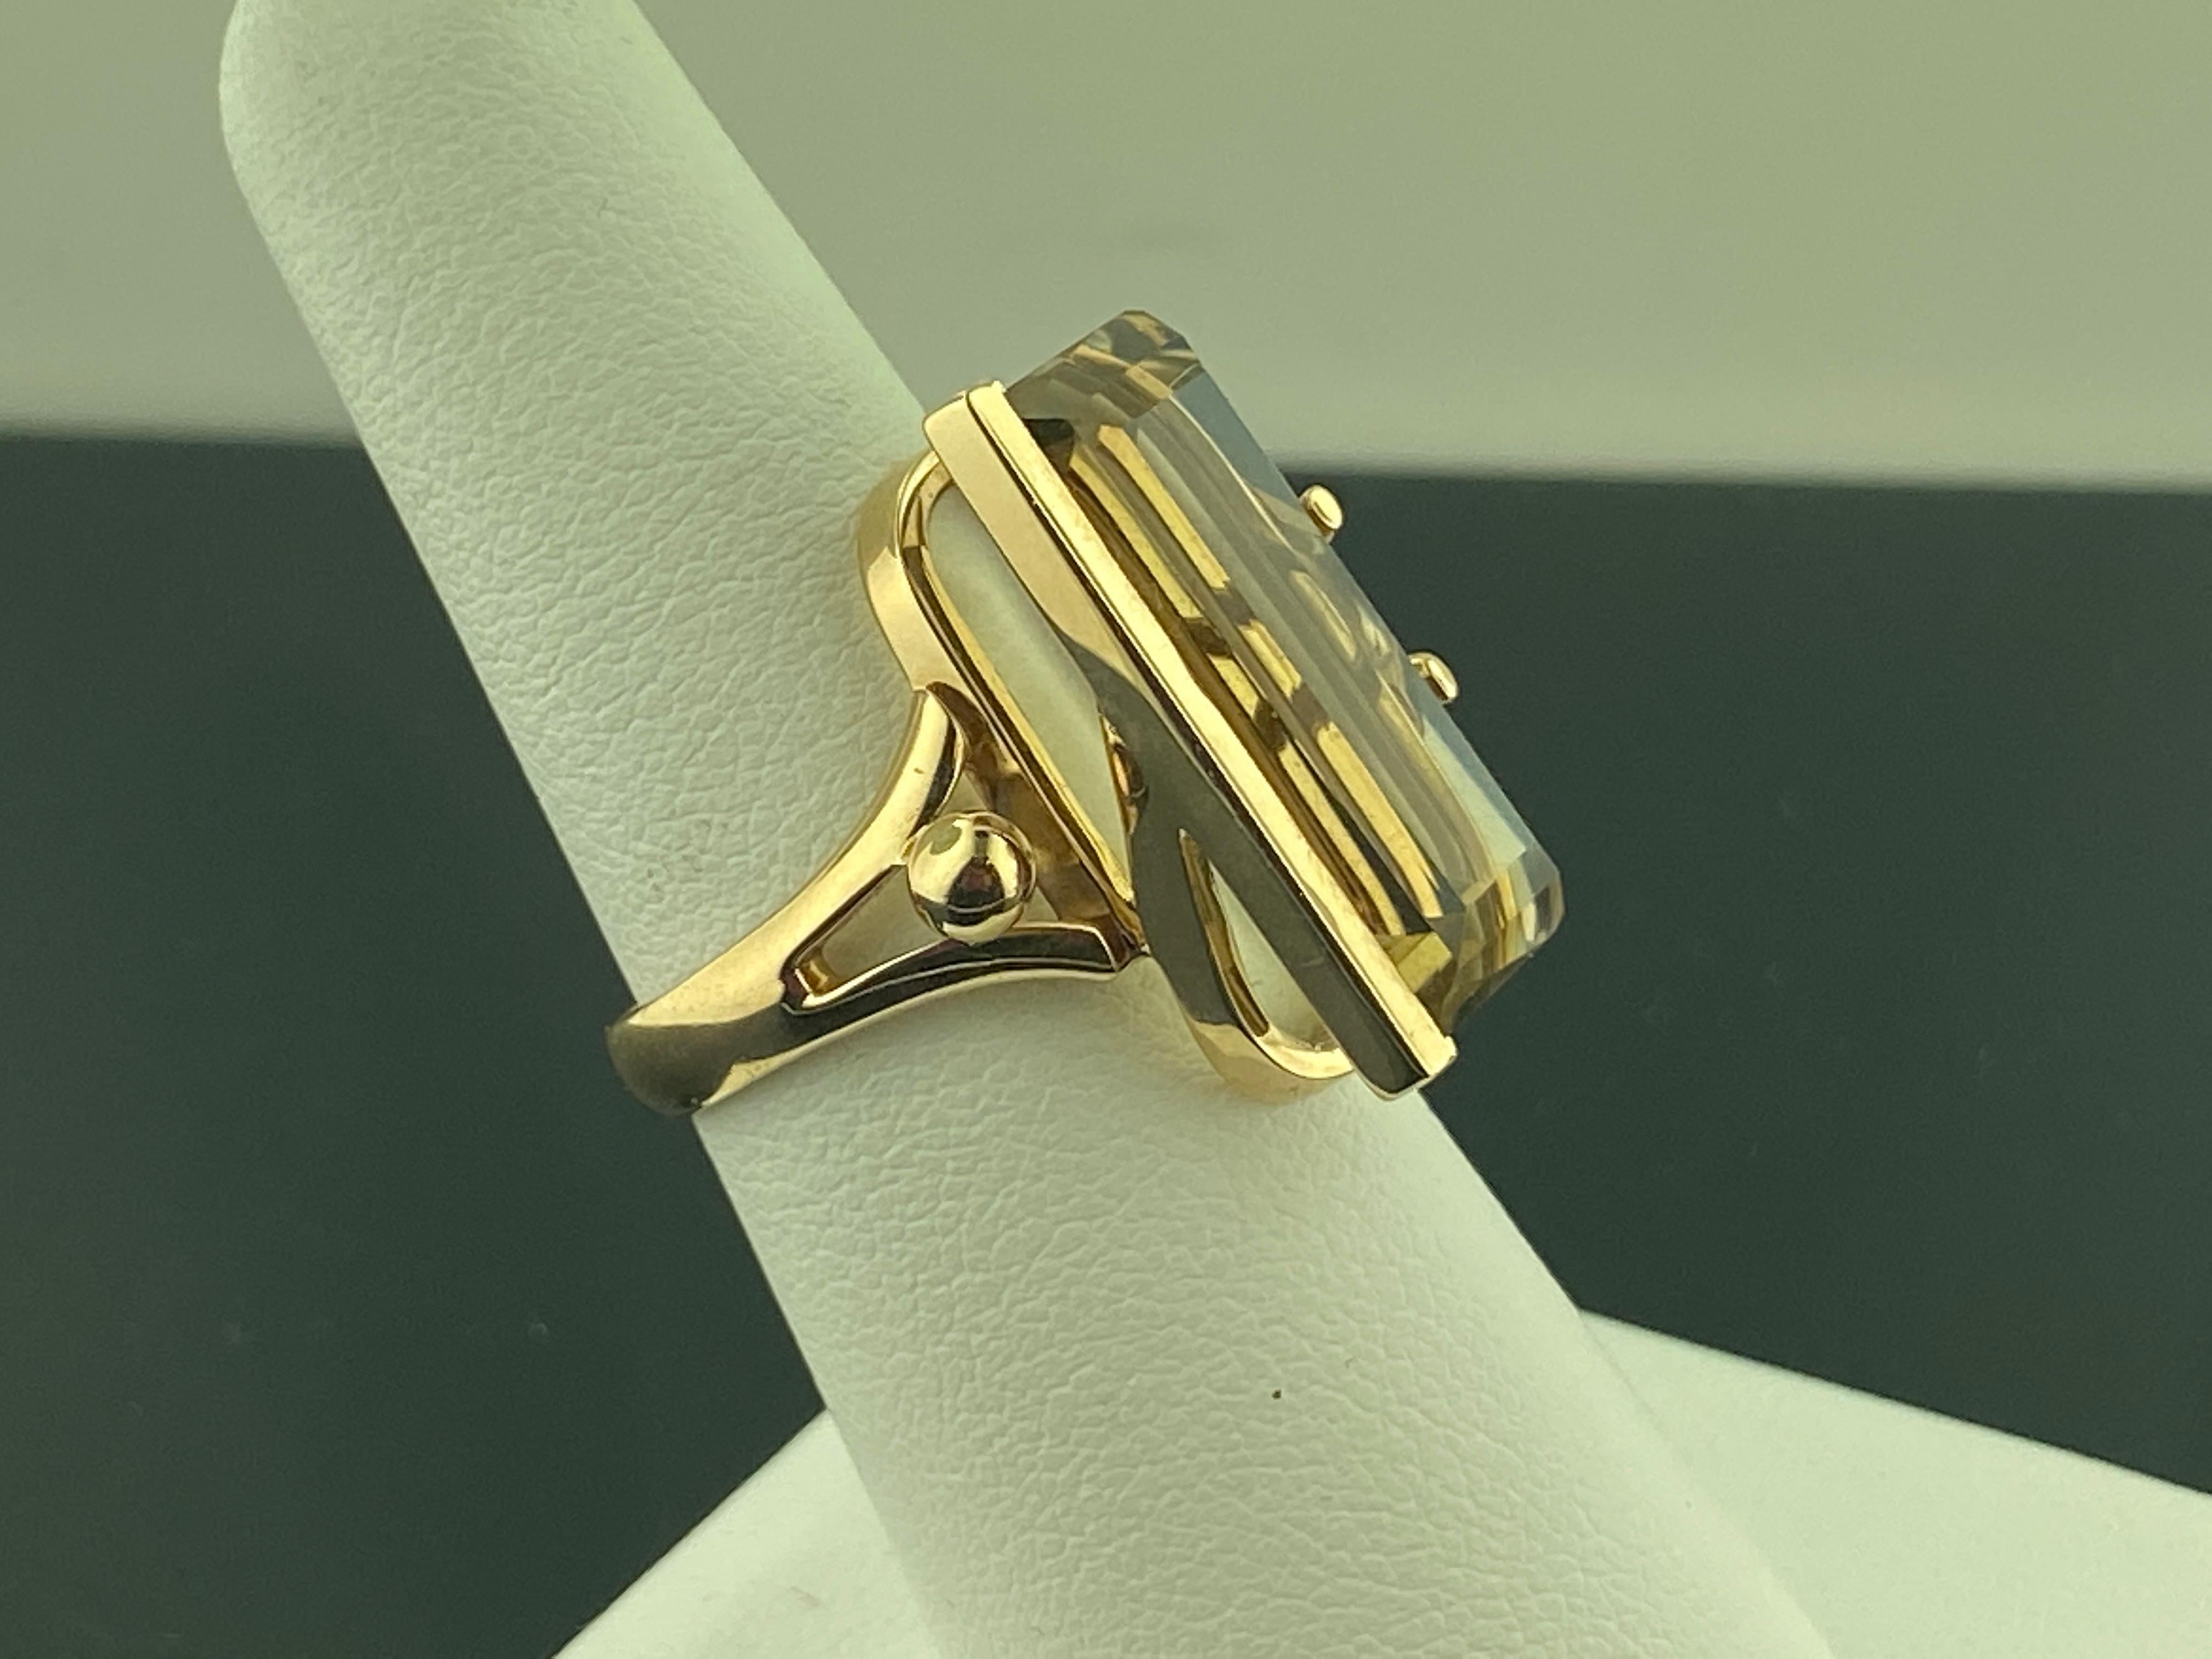 10.66 Carat Emerald Cut Smokey Quartz Ring in Yellow Gold In Excellent Condition For Sale In Palm Desert, CA